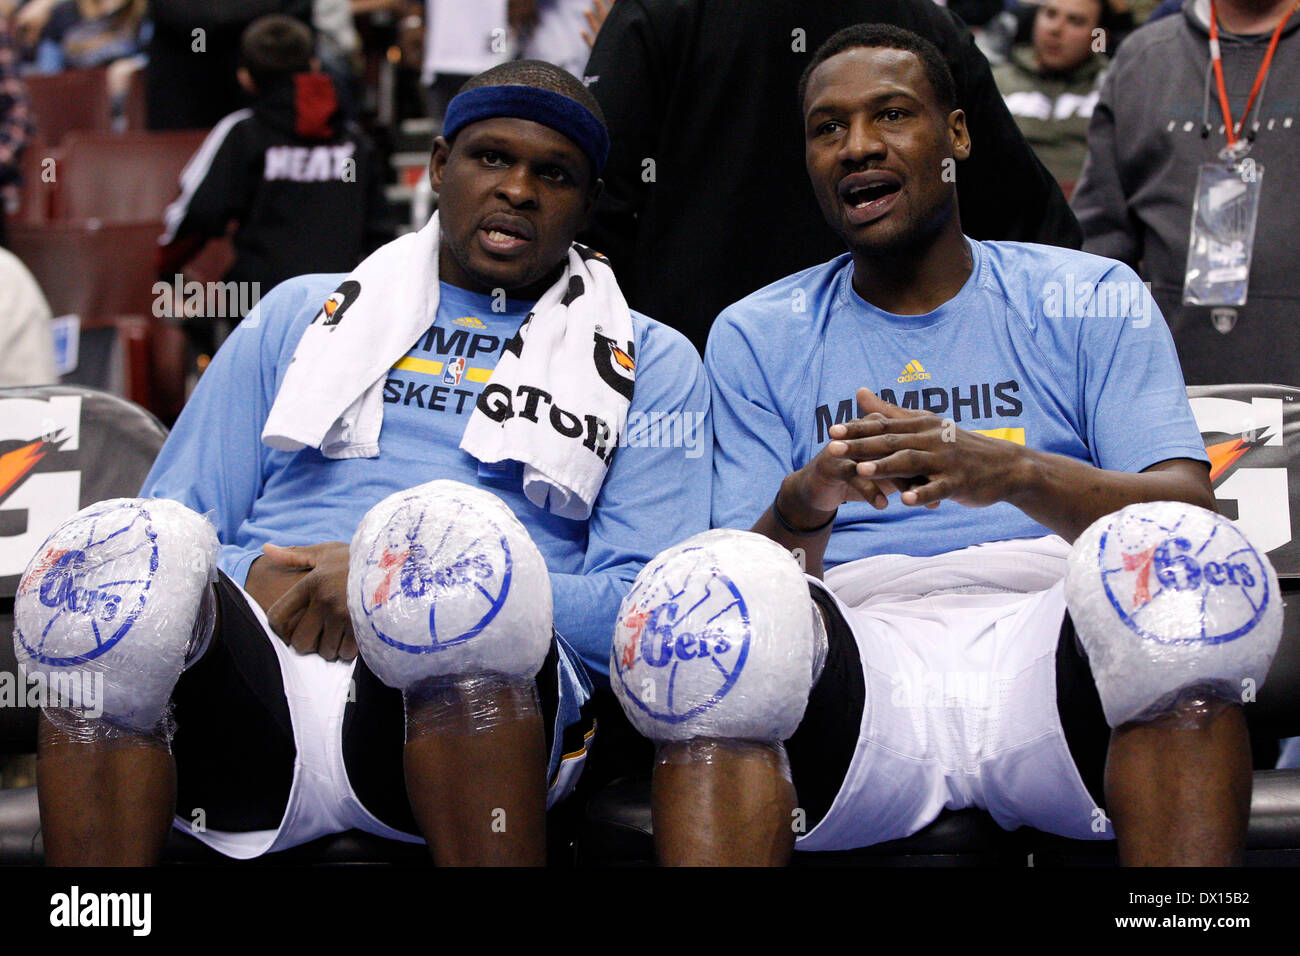 Philadelphia, Pennsylvania, USA. 16th Mar, 2014. March 15, 2014: Memphis Grizzlies forward Zach Randolph (50) looks on from the bench with guard Tony Allen (9) with 76ers Ice Bags on their knees during the NBA game between the Memphis Grizzlies and the Philadelphia 76ers at the Wells Fargo Center in Philadelphia, Pennsylvania. The Memphis Grizzlies won 103-77. Christopher Szagola/Cal Sport Media/Alamy Live News Stock Photo